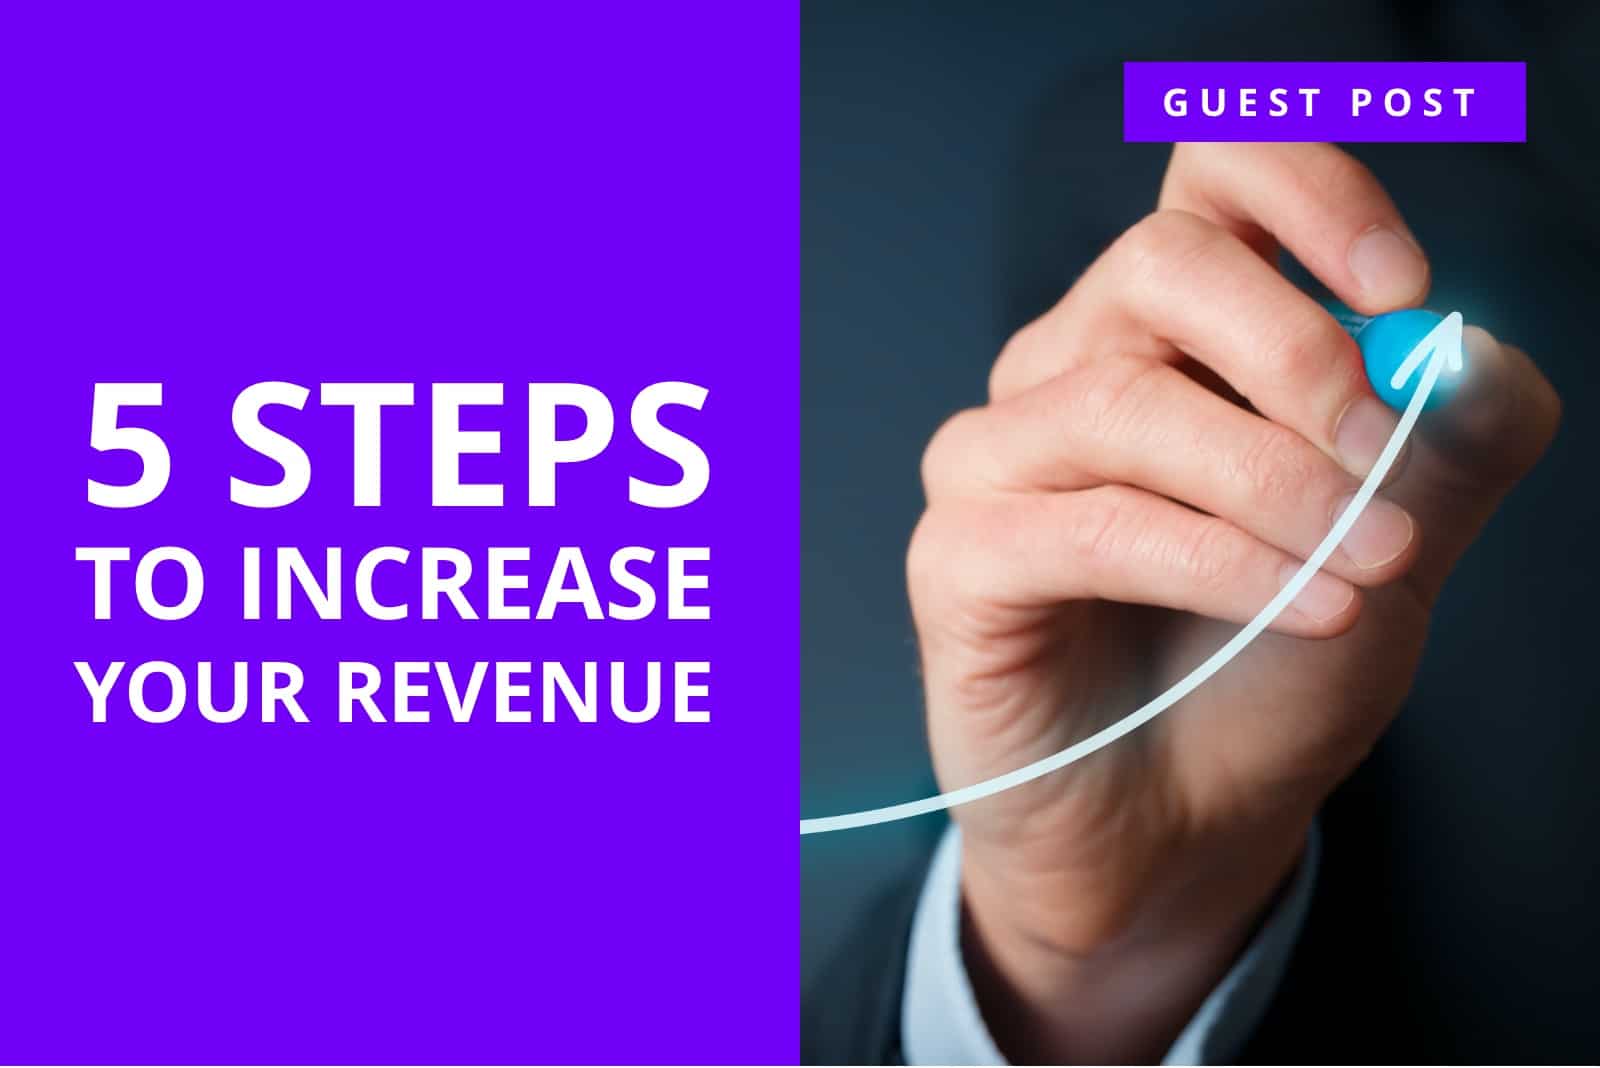 5 Steps to Increase Your Revenue